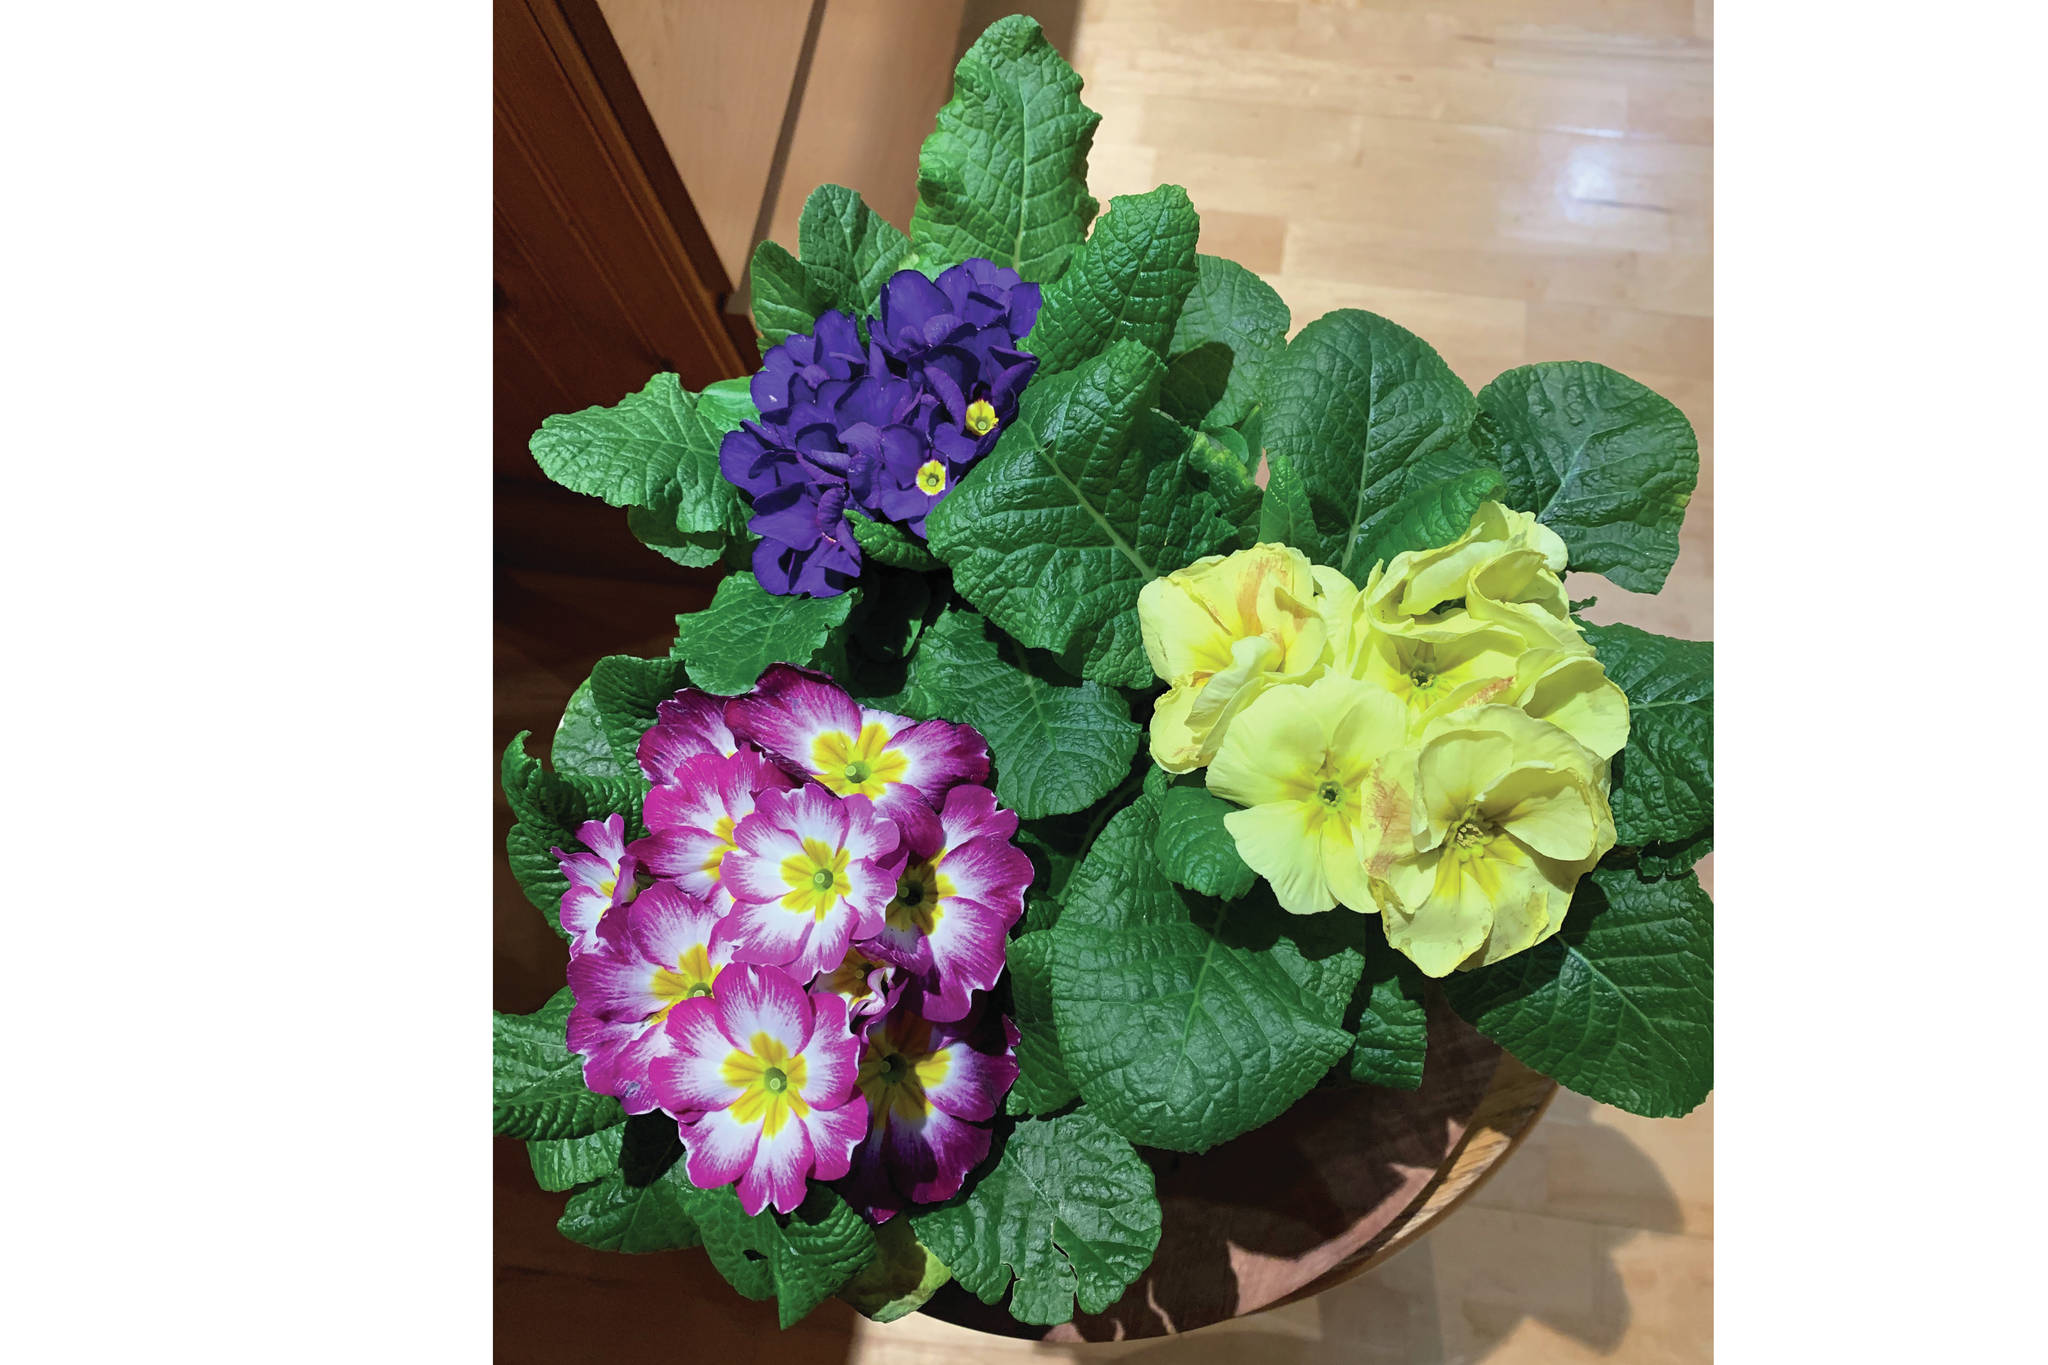 "These primulas were not to be resisted," the Kachemak Gardener says of these flowers blooming in her Homer, Alaska, home on Feb. 2, 2021. "They will enhance the dining room table and then, come spring, find a home in the East Garden." (Photo by Rosemary Fitzpatrick)